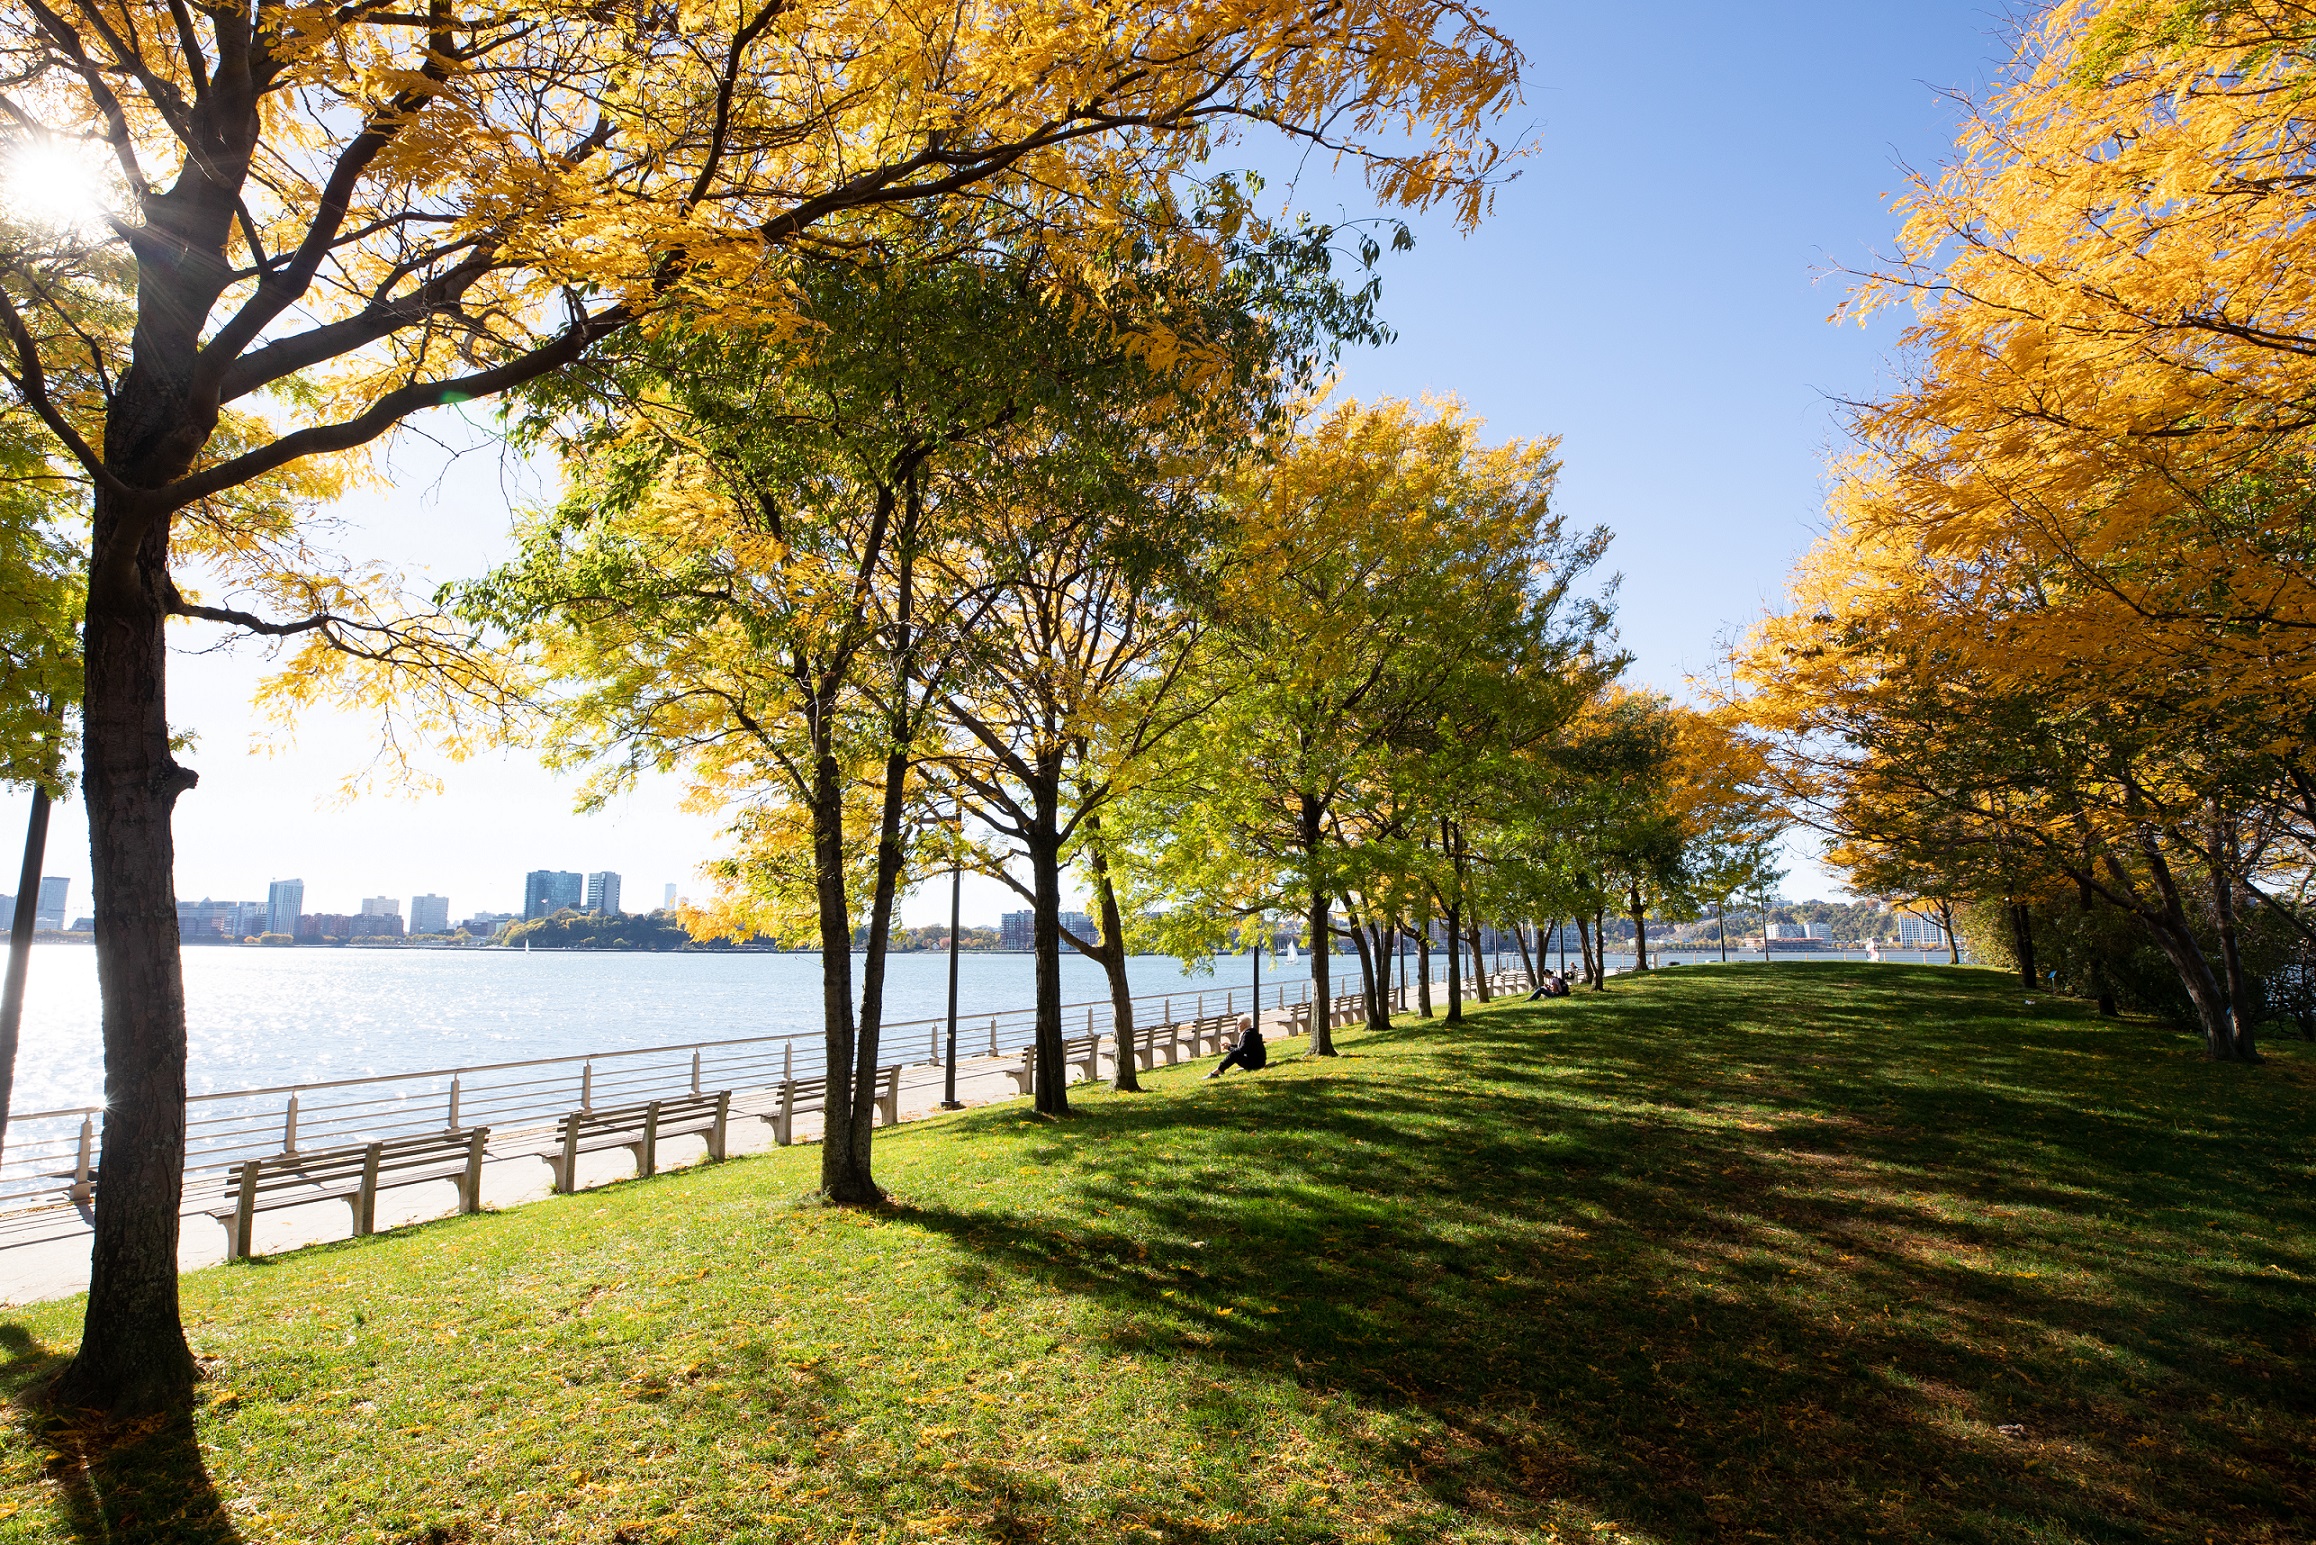 A sunny fall day on Hudson River Park's Pier 64, featuring beautiful golden foliage